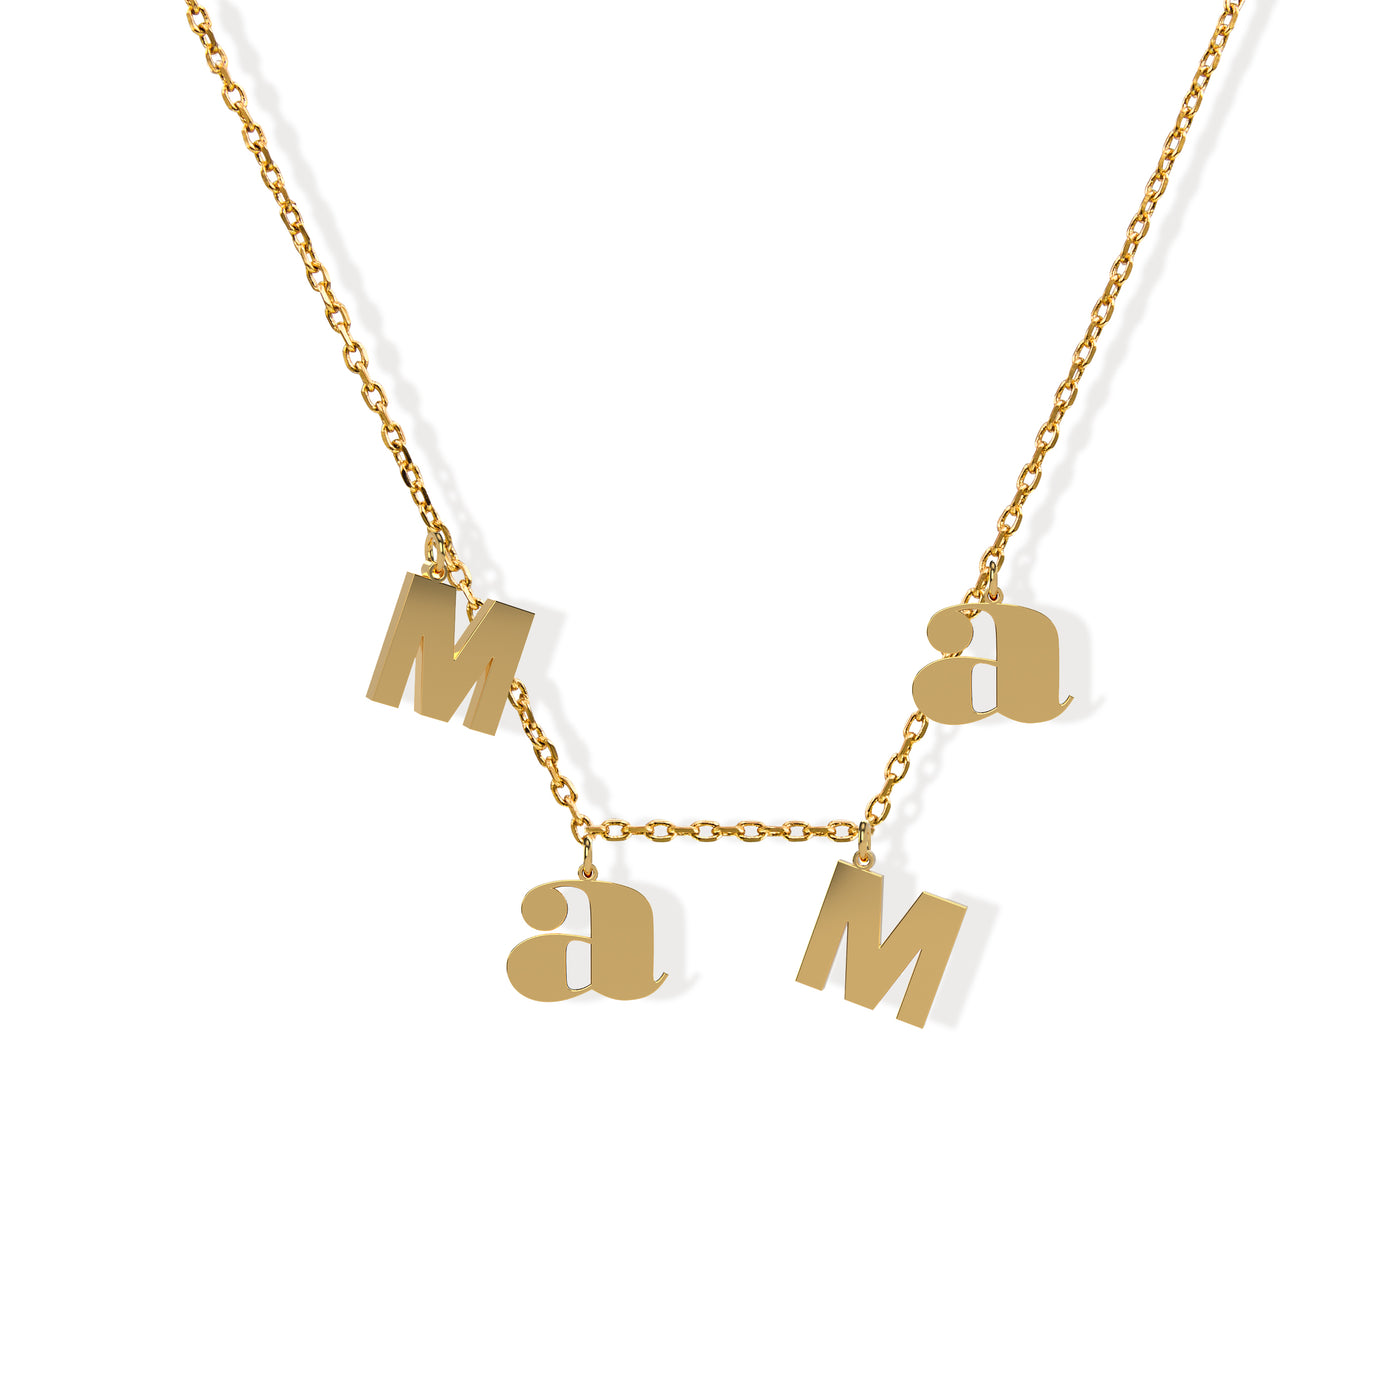 MaMa NECKLACE, 18KT Gold